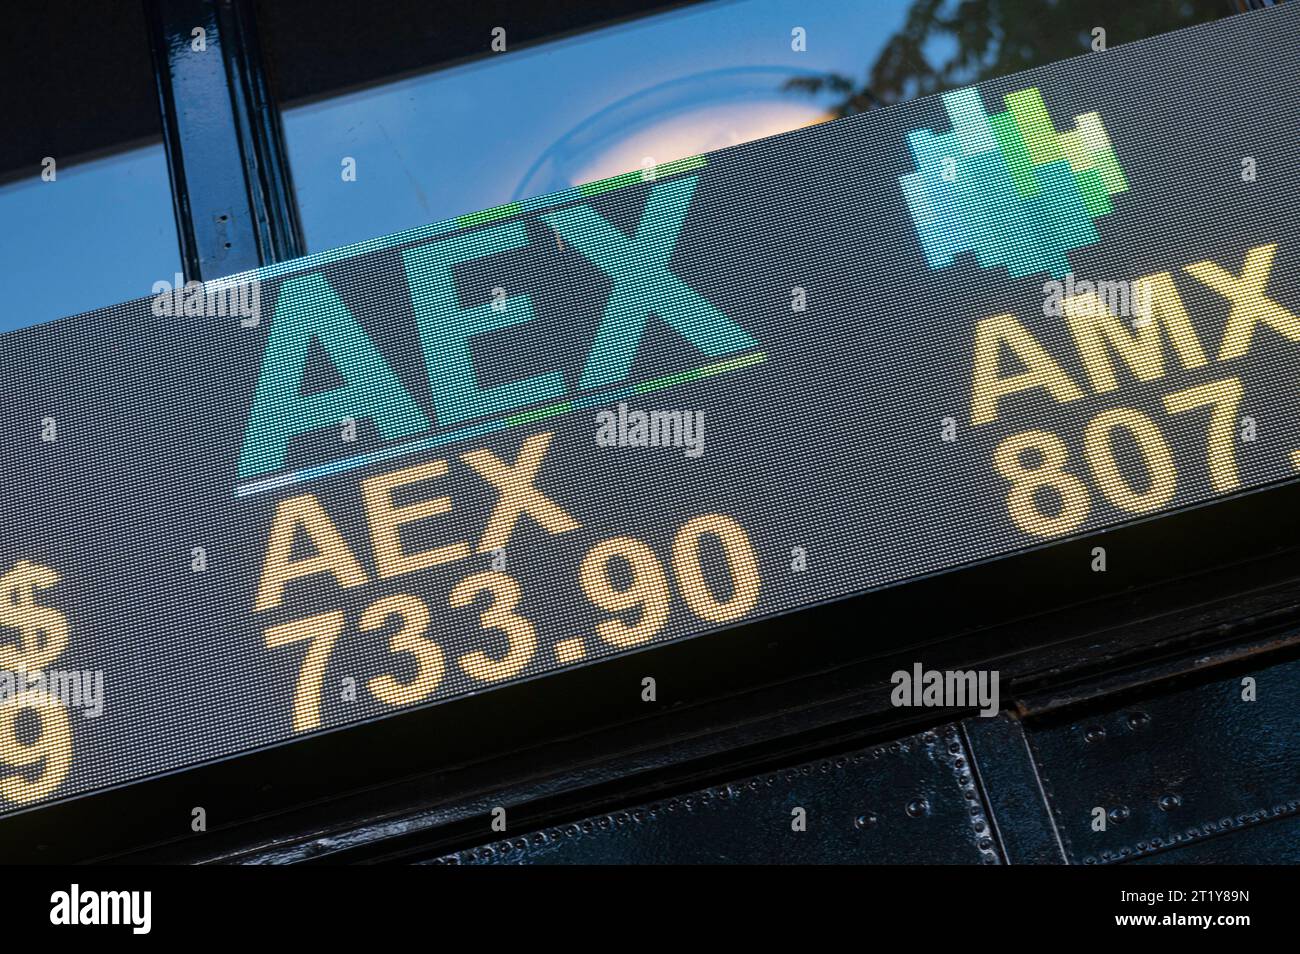 Amsterdam The, Netherlands. 15th Oct, 2023. Beursplein 5 Amsterdam Euronext stock exchange aandelenbeurs, considered to be the oldest securities exchanges in the world. LED lamp tickertape shows the price of shares for AEX quoted companies. The AEX index as of Friday 13th October. finance, financial, effectenbeurs, handelsbeurzen, equities, trade, trading, bedrijf, bedrijven, business, logo, Credit: Imago/Alamy Live News Stock Photo